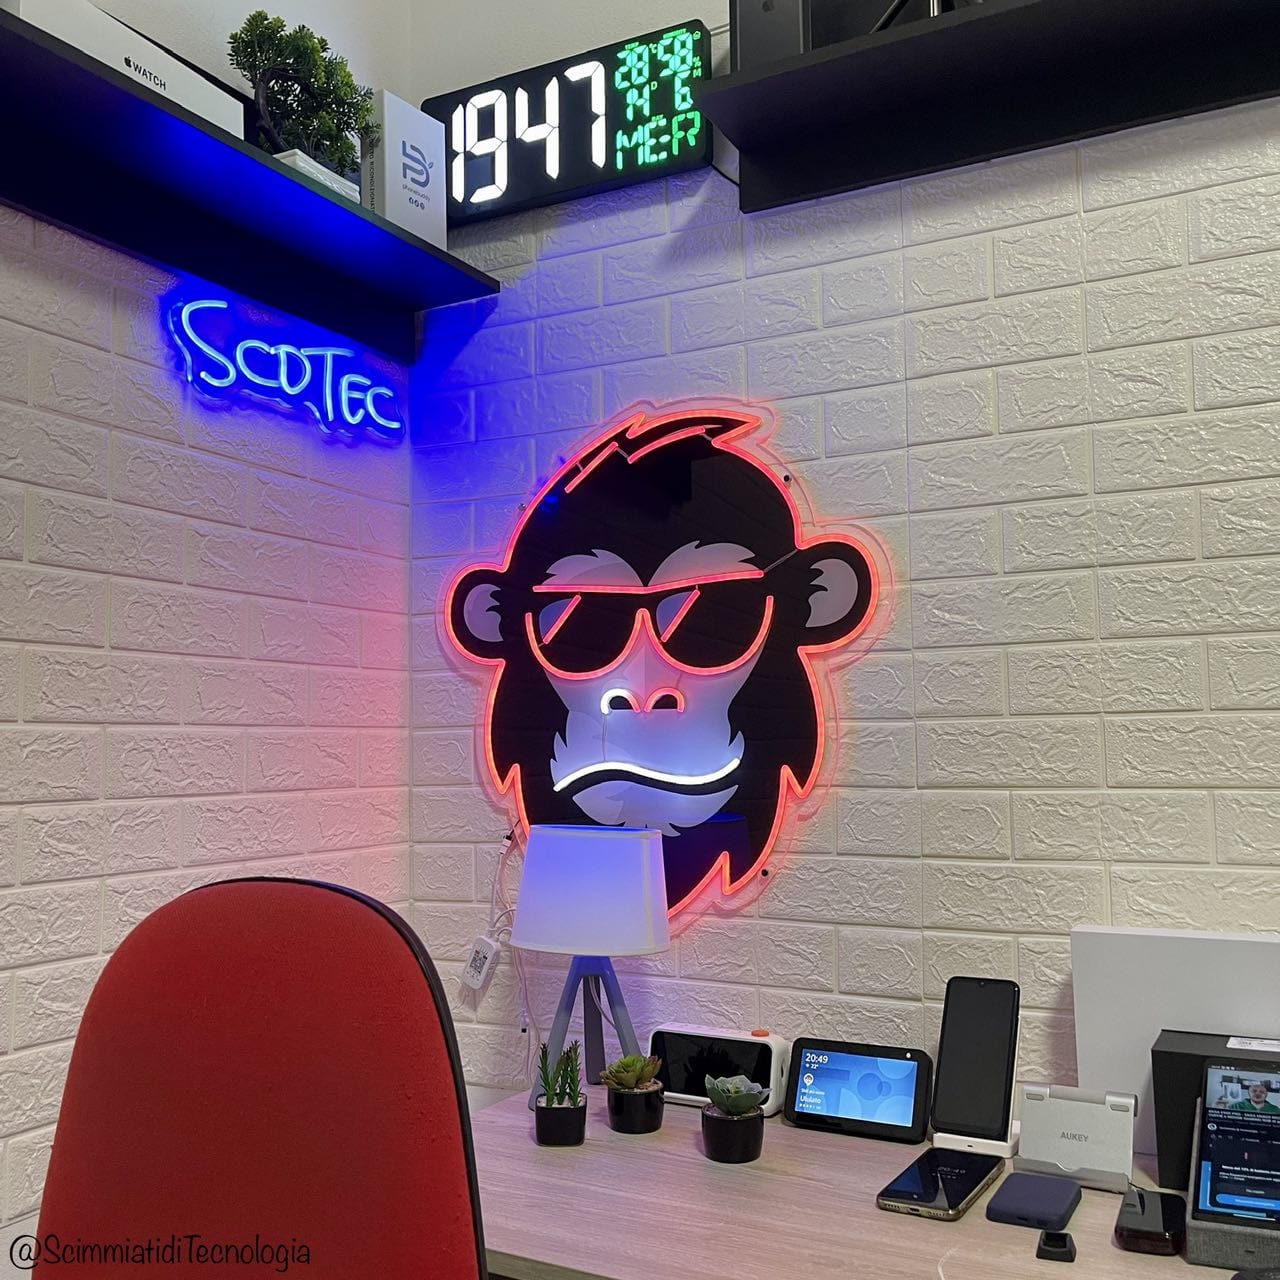 Hip Monkey with Glasses FloWill LED Neon Sign